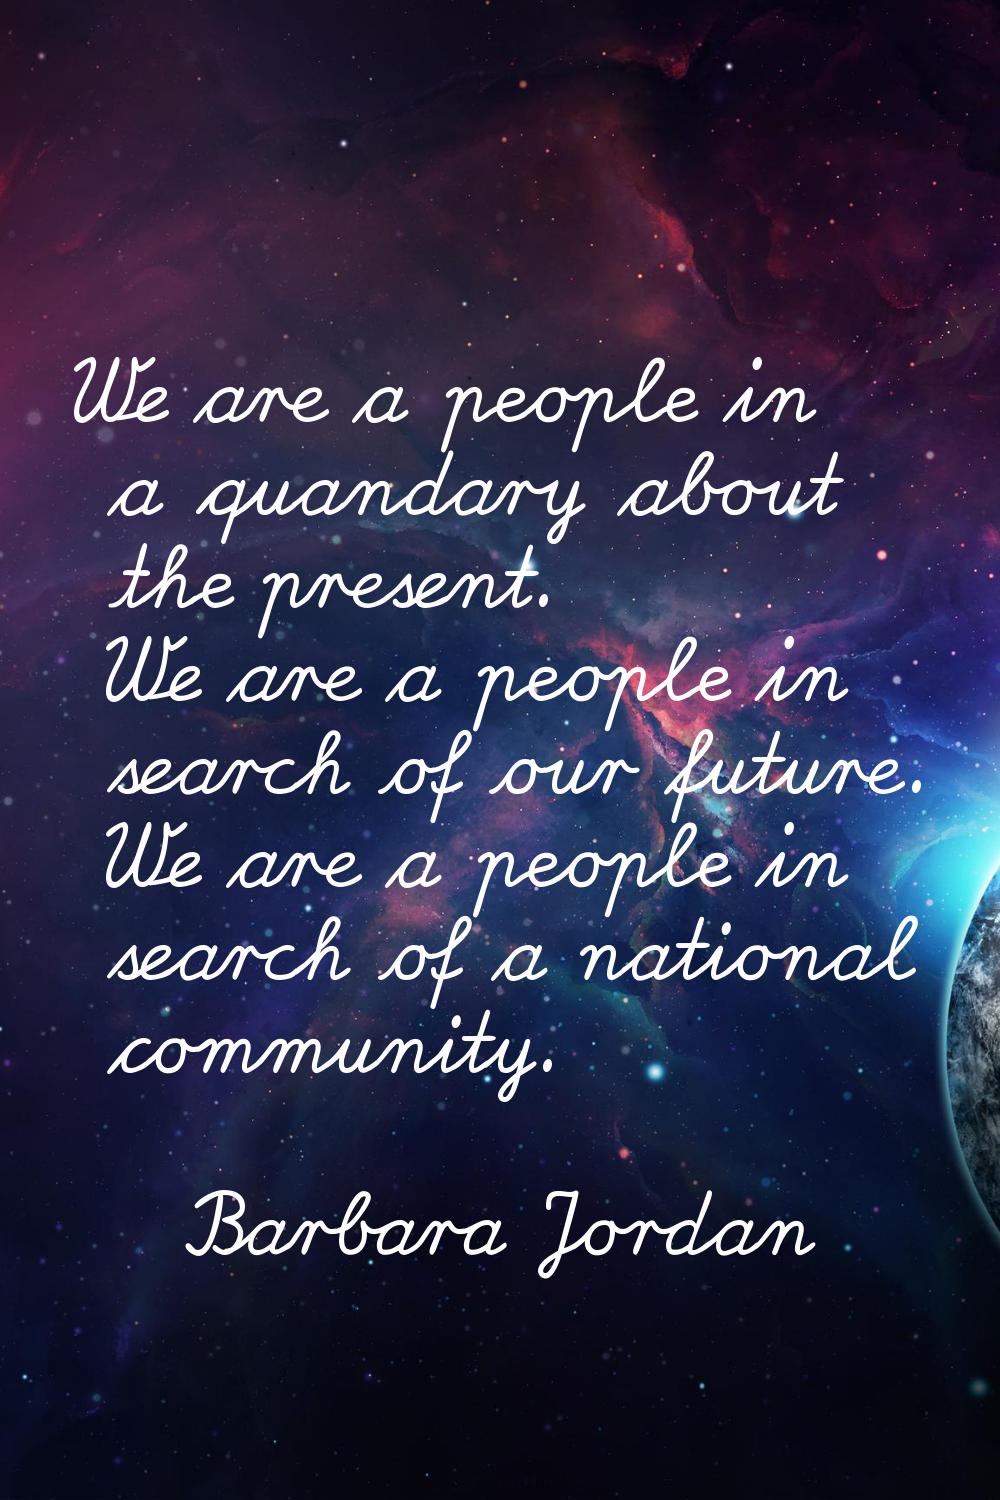 We are a people in a quandary about the present. We are a people in search of our future. We are a 